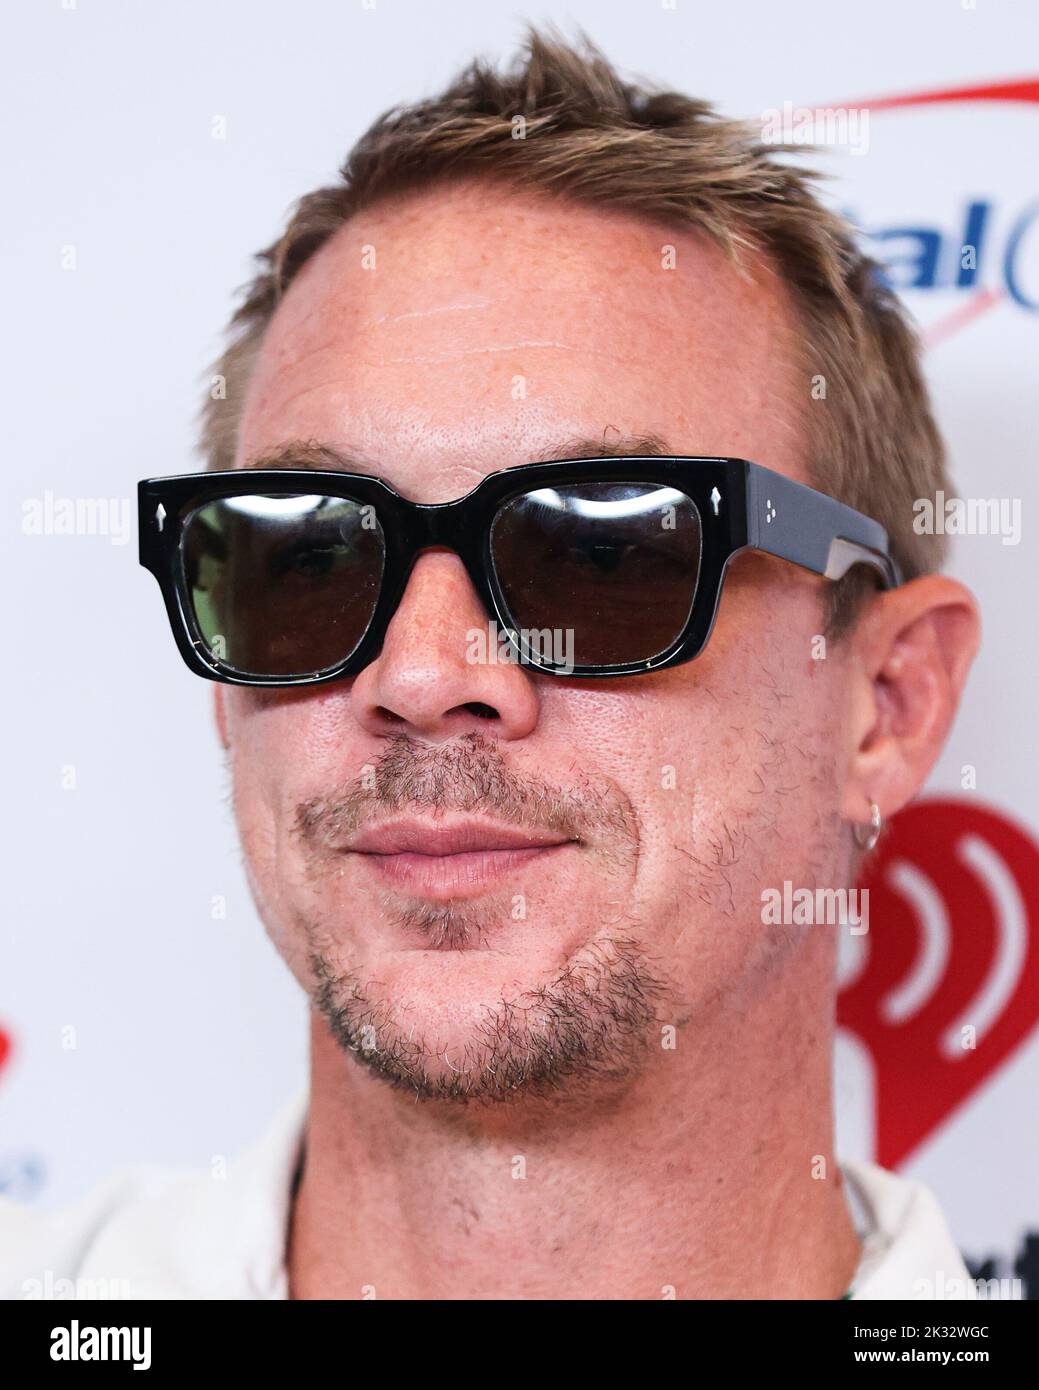 LAS VEGAS, NEVADA, USA - SEPTEMBER 23: Diplo poses in the press room at the 2022 iHeartRadio Music Festival - Night 1 held at the T-Mobile Arena on September 23, 2022 in Las Vegas, Nevada, United States. (Photo by Xavier Collin/Image Press Agency) Stock Photo